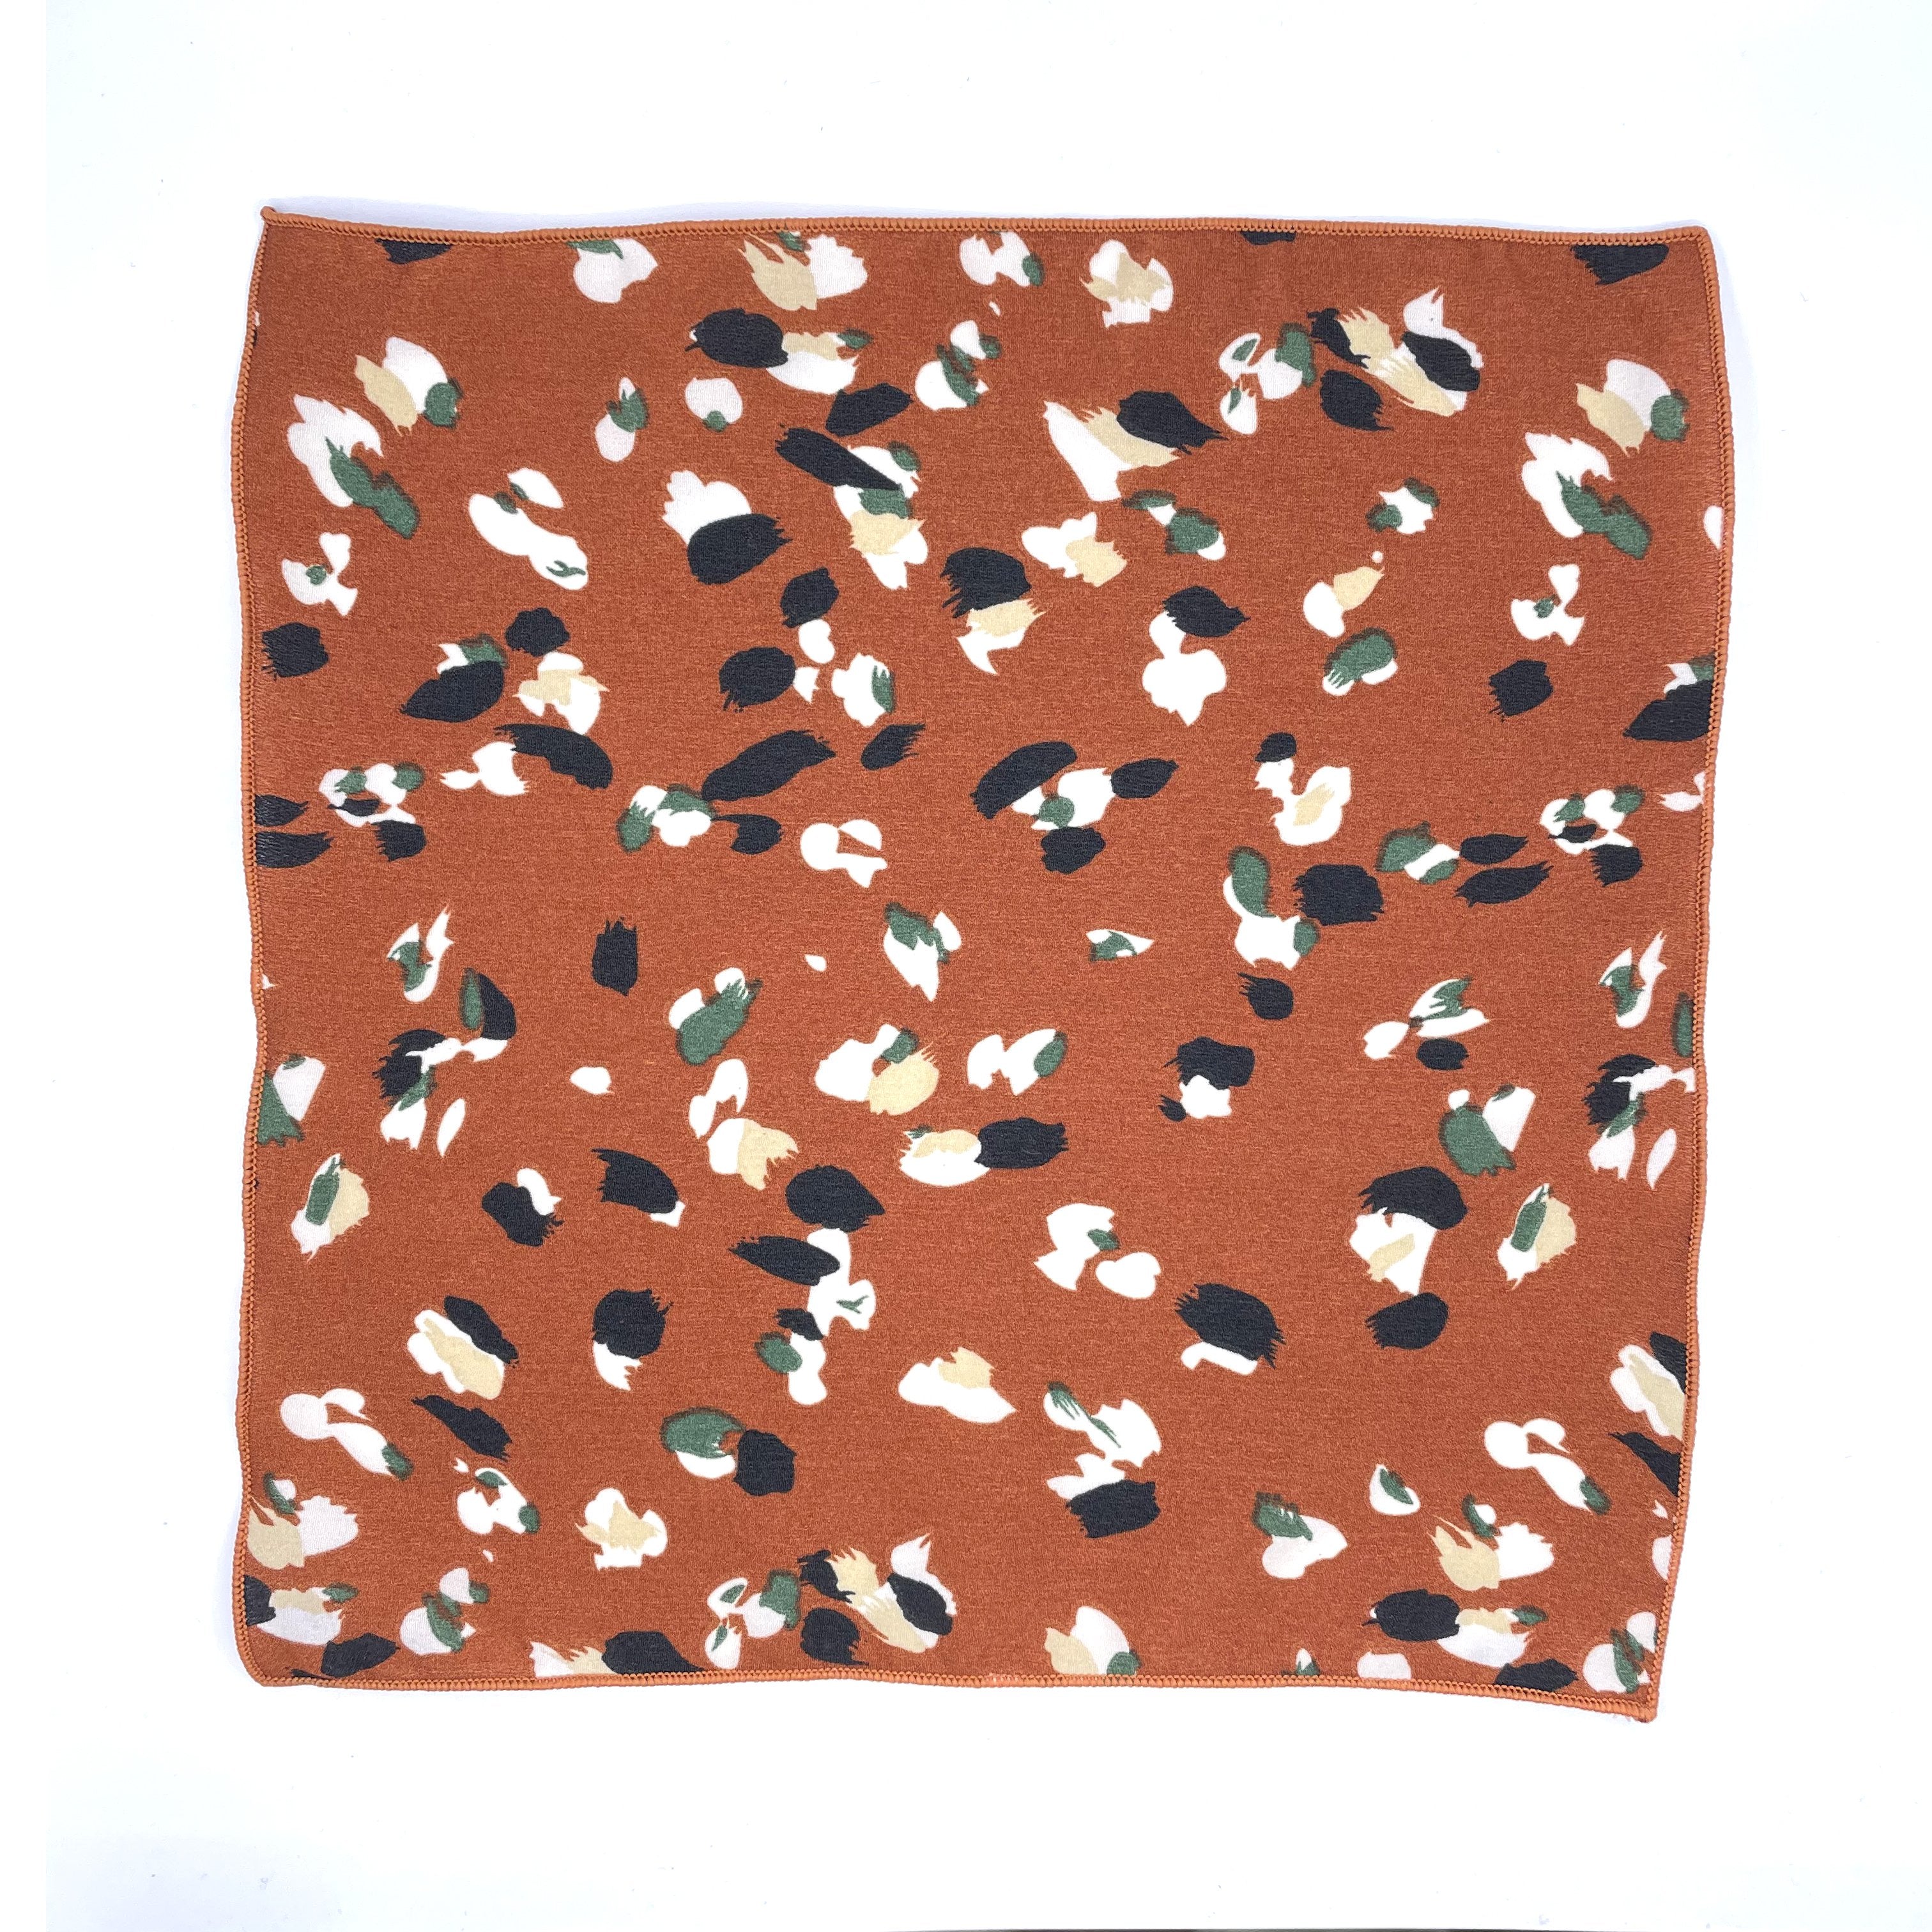 Terracotta Floral Pocket Square - Mytieshop - PHOEBE T Mytieshop Terracotta Floral Pocket Square Material CottonItem Length: 23 cm ( 9 inches)Item Width : 22 cm (8.6 inches) Color: Terracotta The PHOEBE is the perfect accessory to add a touch of elegance to your outfit. Made of 100% Silk, this pocket square is sure to make a statement. The intricate floral design is eye-catching and will surely turn heads. Whether you're dressing up for a special occasion or simply want to add a touch of sophist